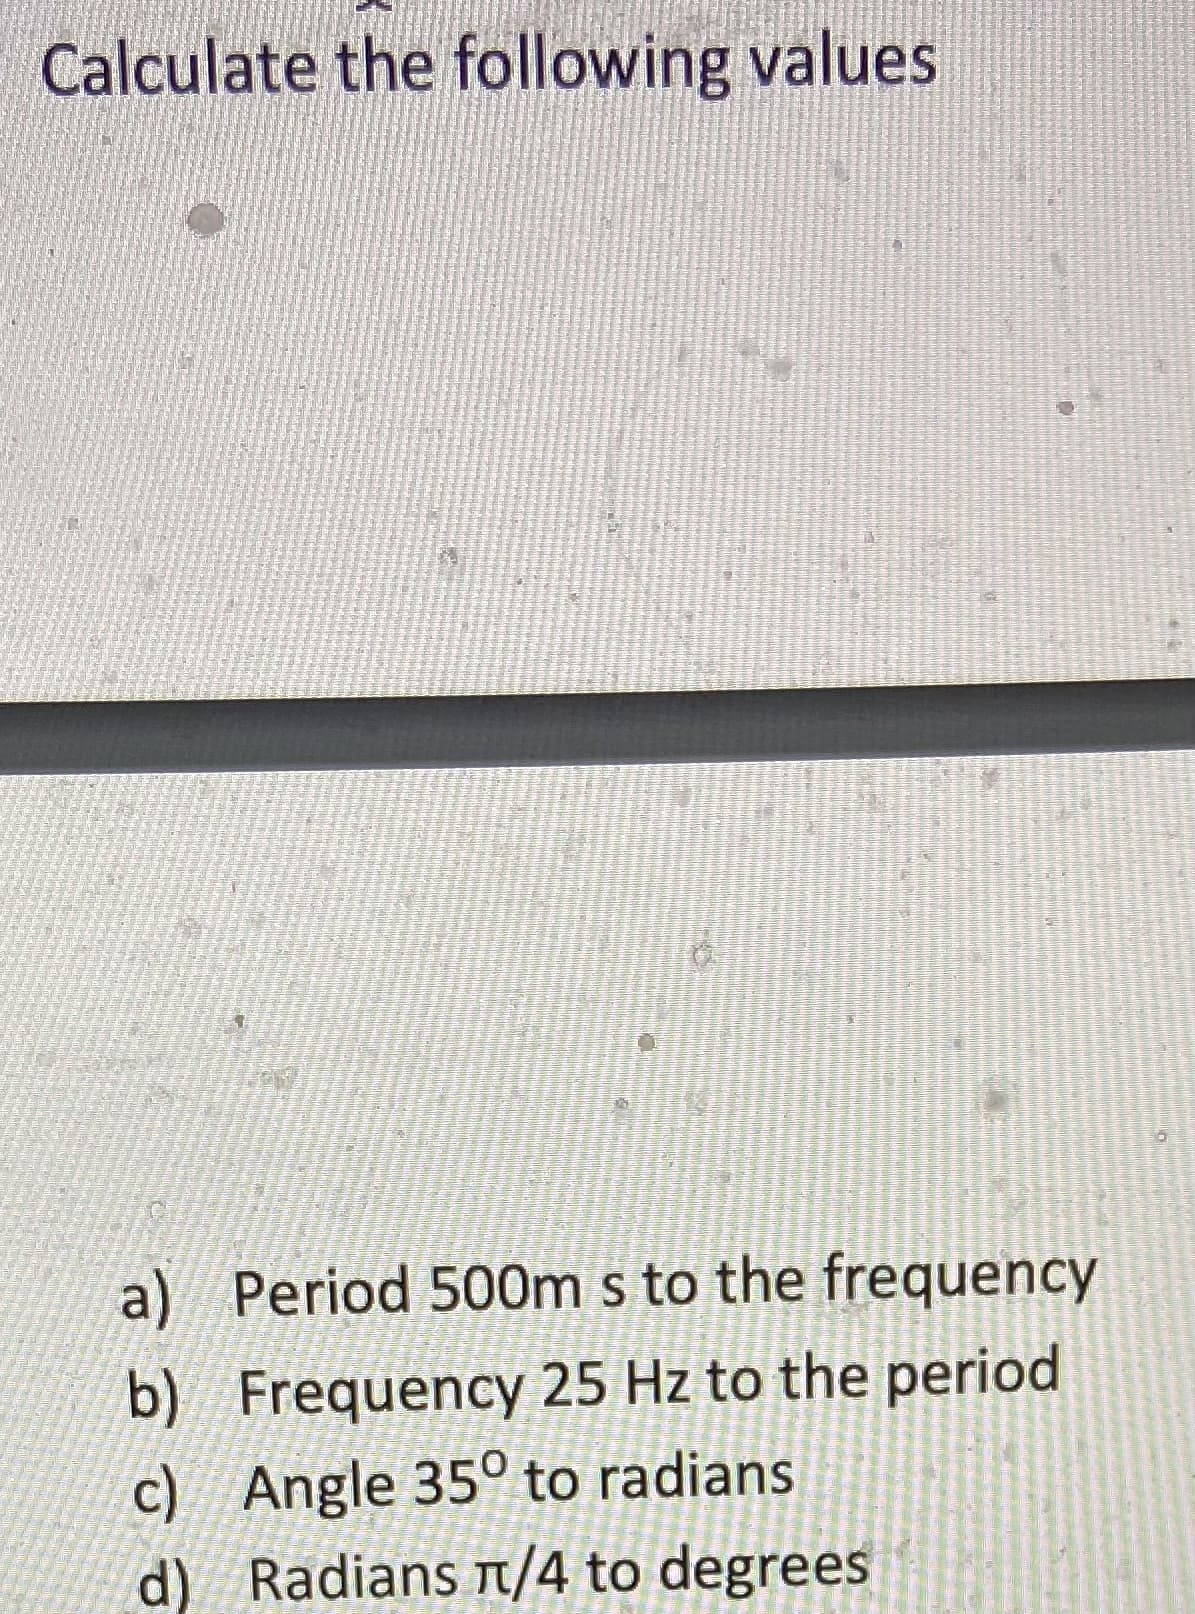 Calculate the following values
a) Period 500m s to the frequency
b) Frequency 25 Hz to the period
c) Angle 35° to radians
d) Radians t/4 to degrees
